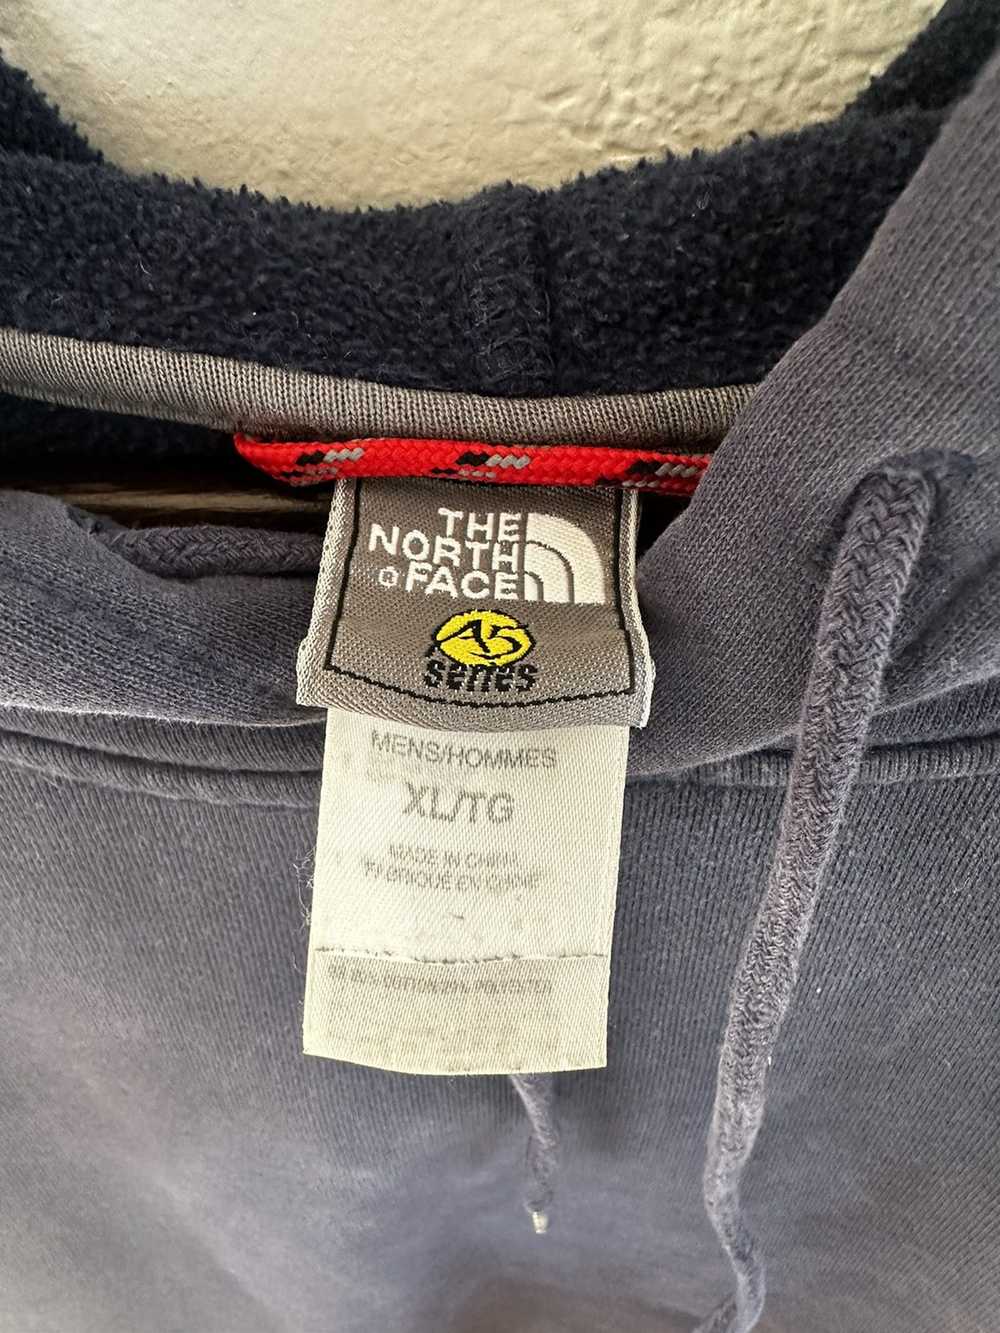 The North Face Vintage The North Face A5 Hoodie - image 3